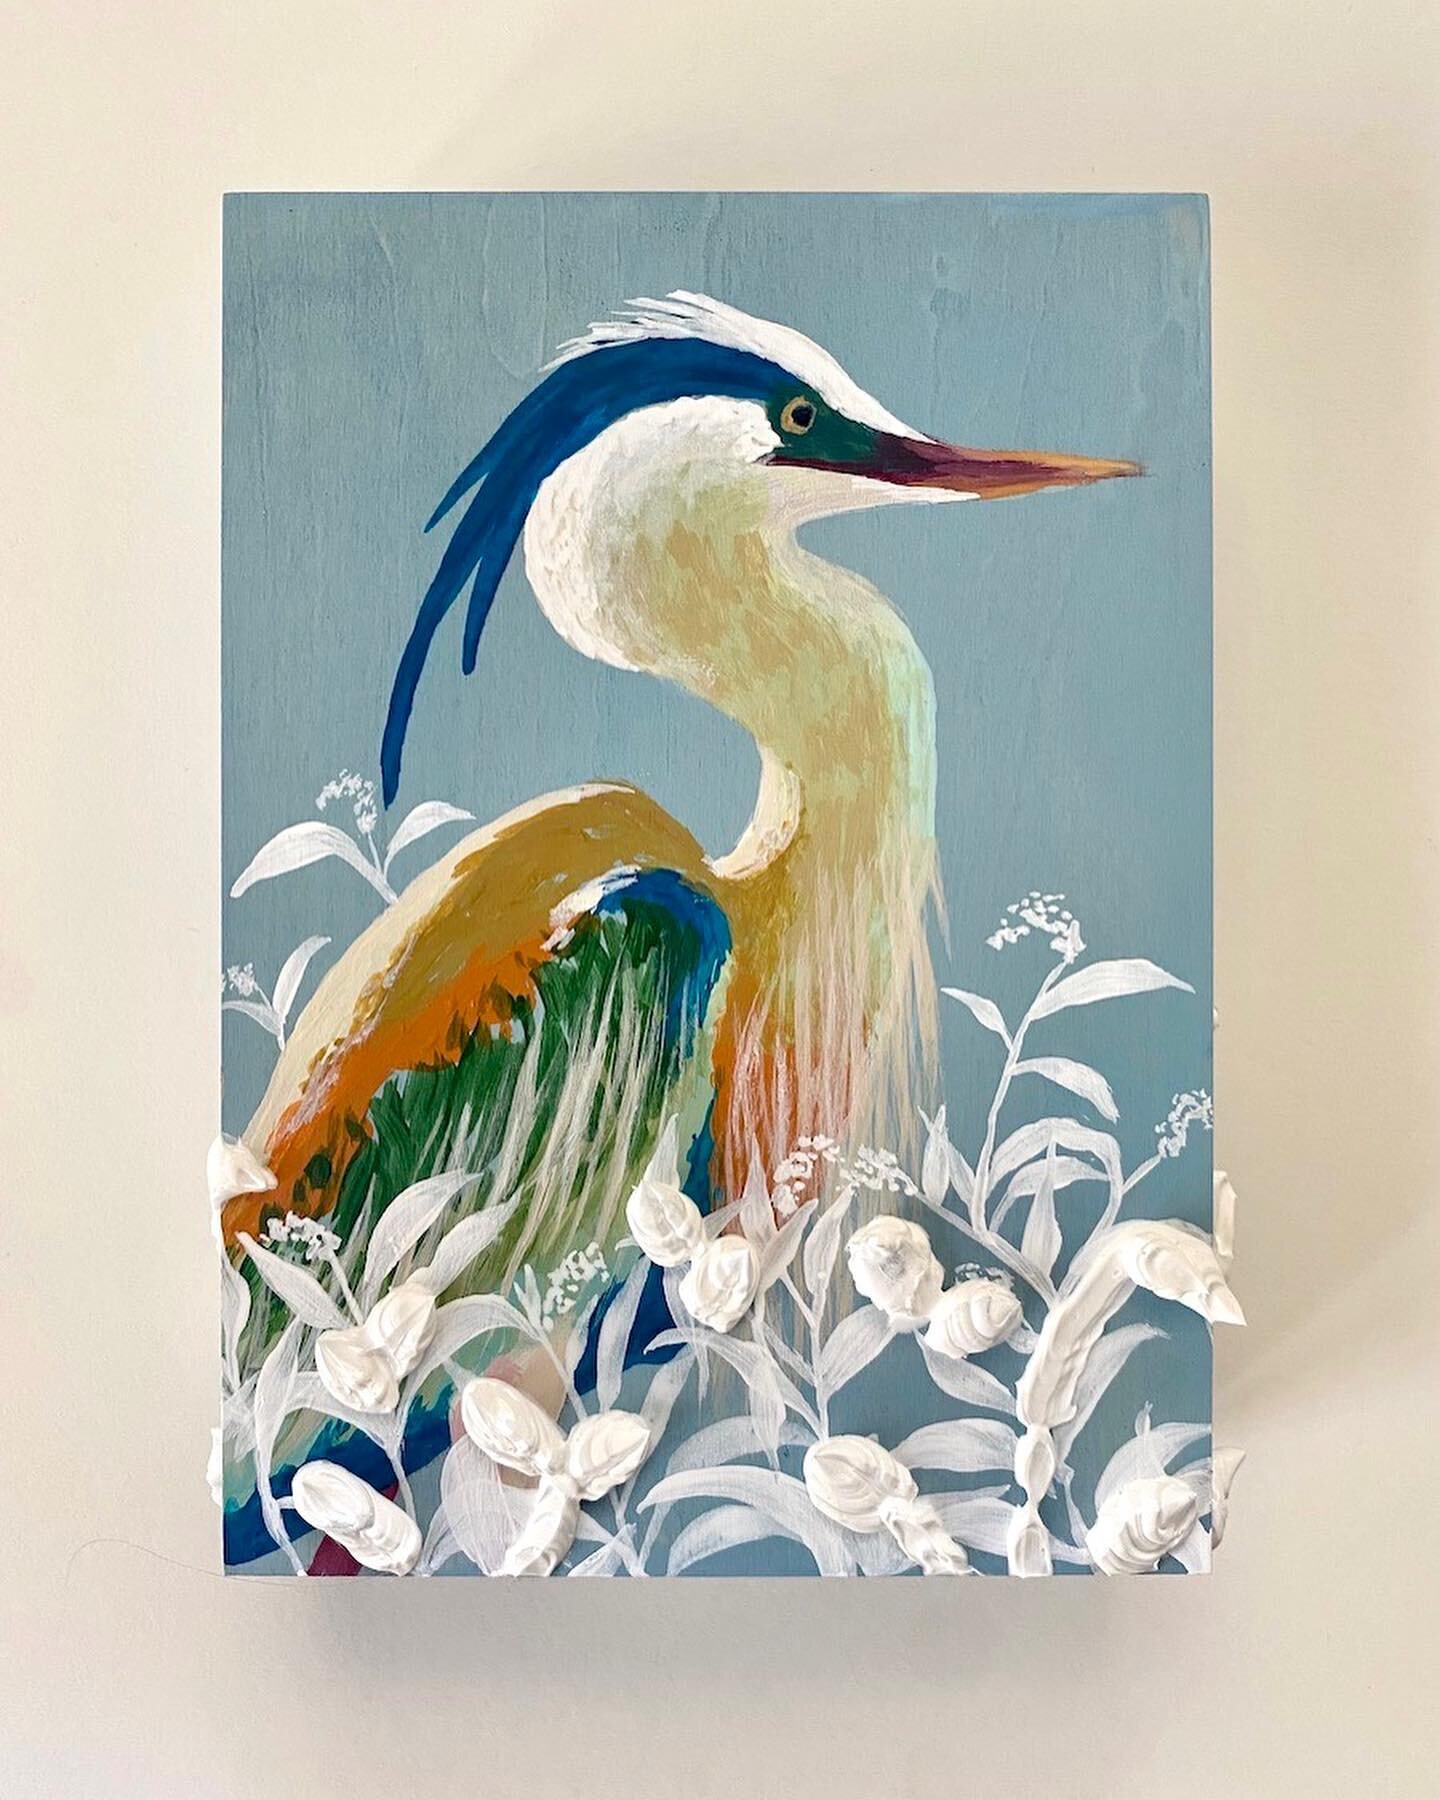 On every drive home from the beach, I am filled to the brim with inspiration! As I was walking down the street of colorful, quirky beach homes with jasmine covered fences, this specific heron painting came to mind, &ldquo;The Ashley&rdquo;.

When I p